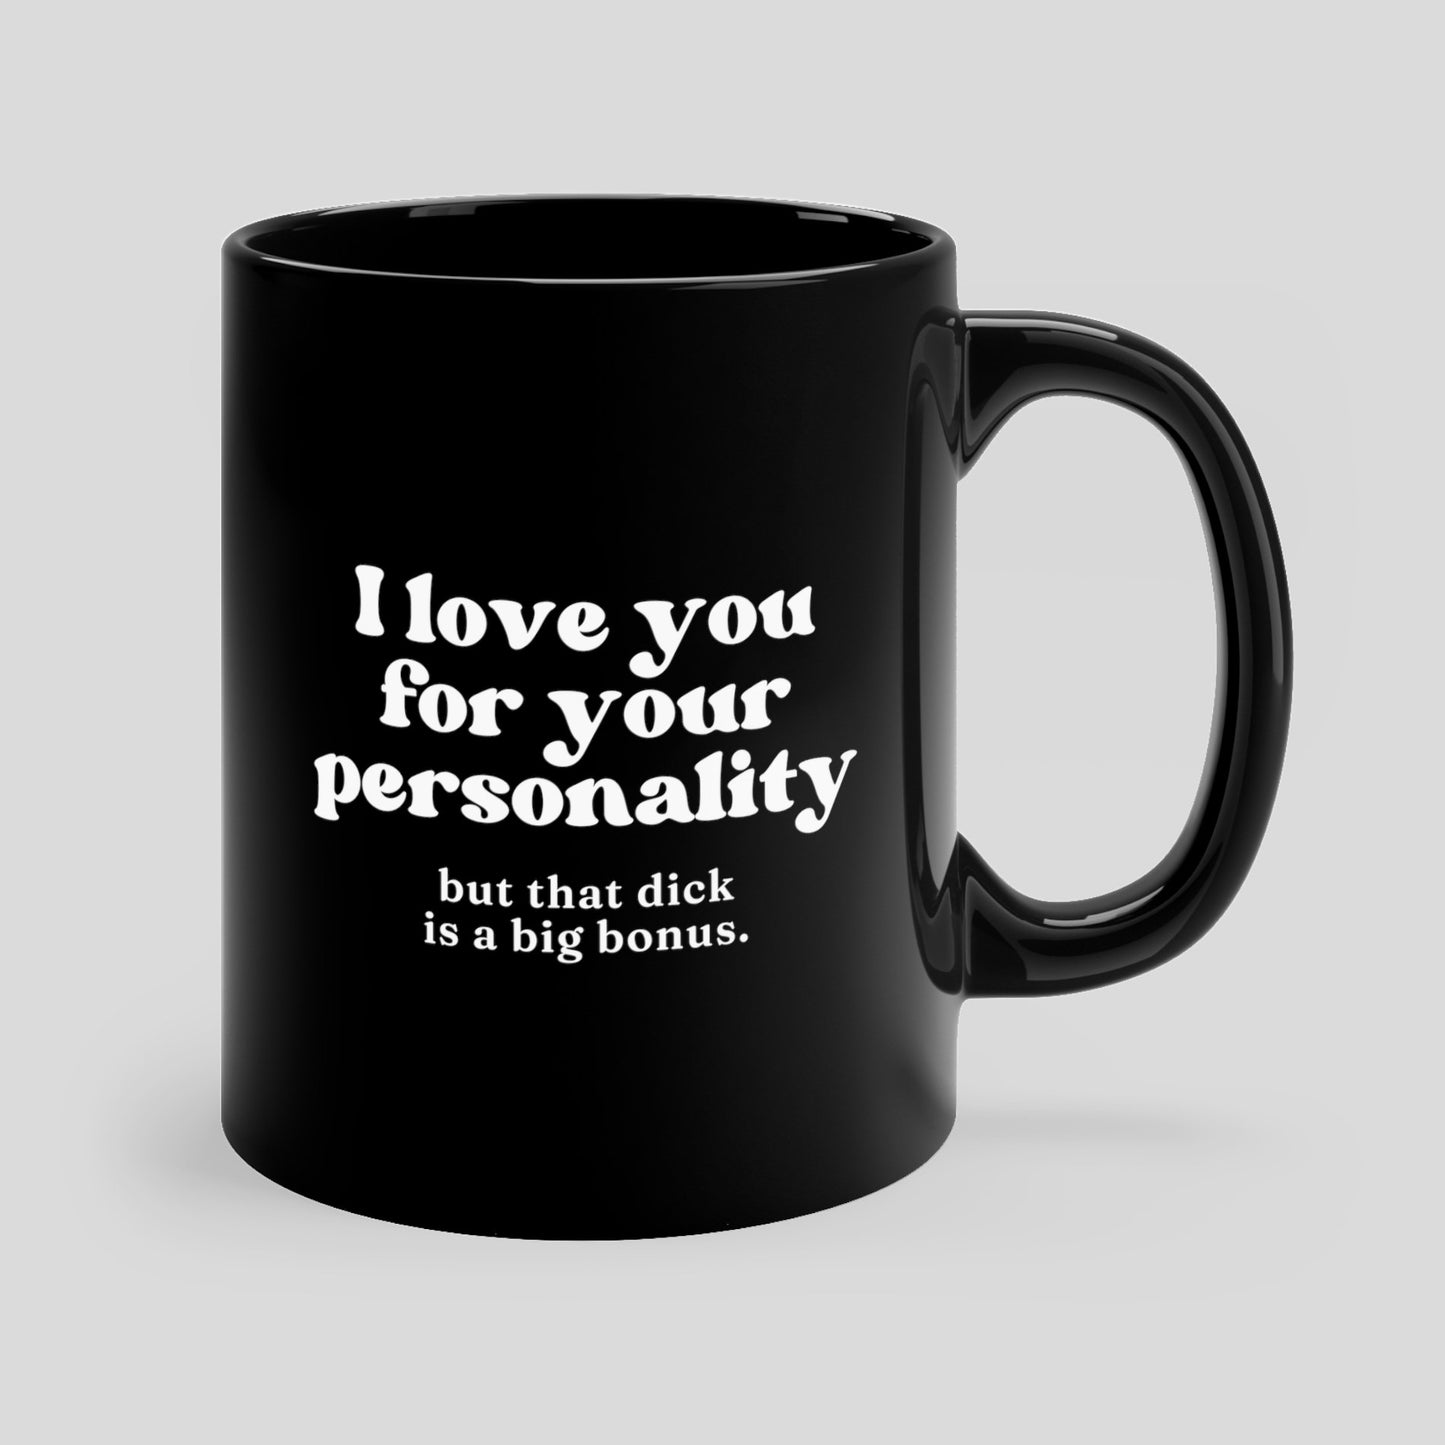 i love you for your personality 11oz black funny coffee mug tea cup gift for him boyfriend husband valentines anniversary joke wedding gag gift waveywares wavey wares cover image